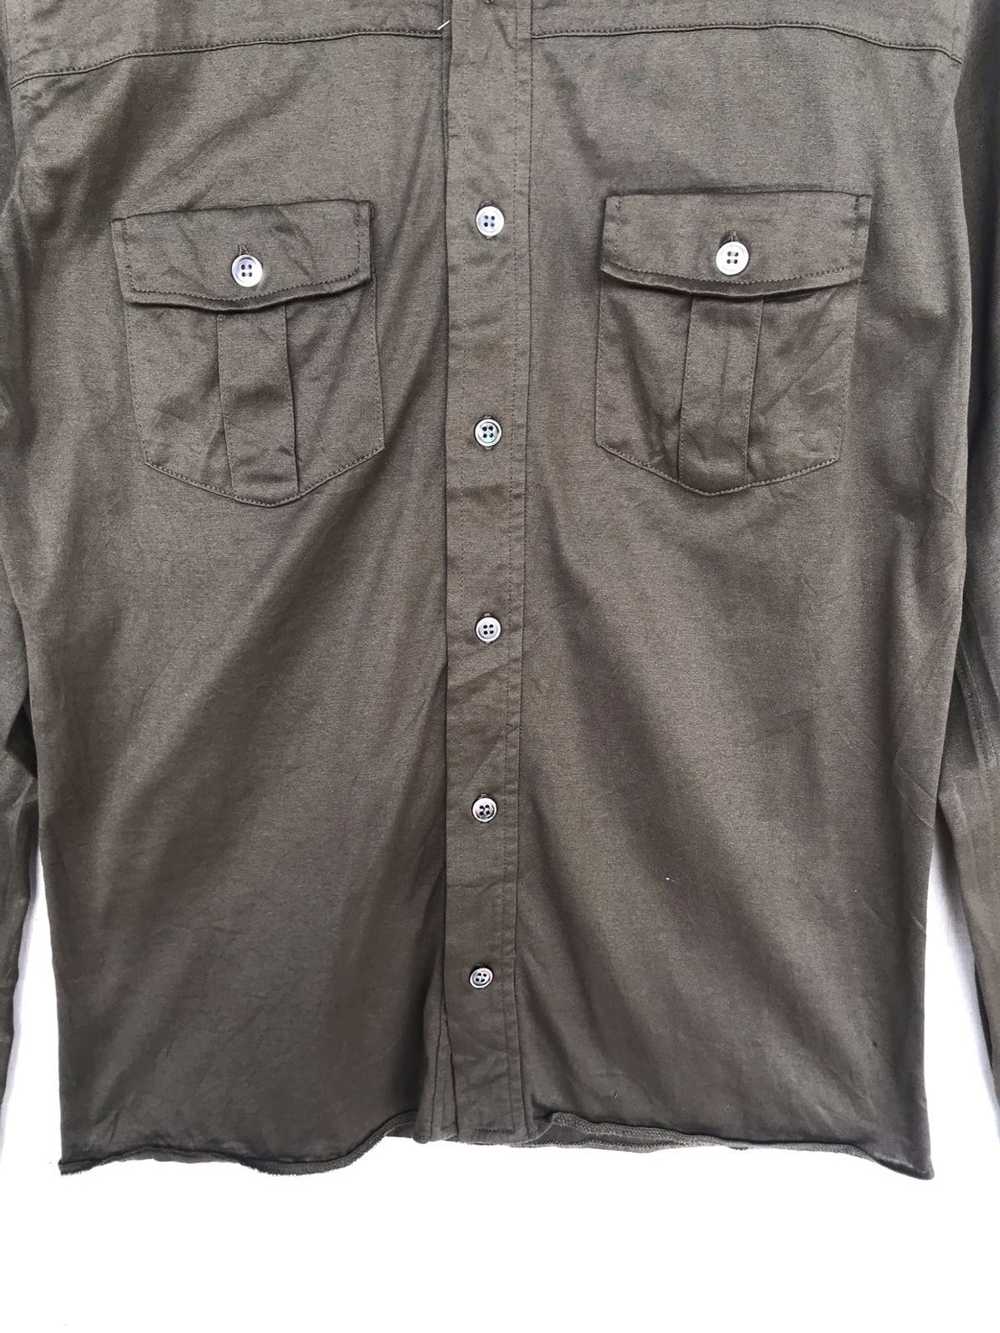 Beams Plus Button ups with Double Pockets shirt. - image 3